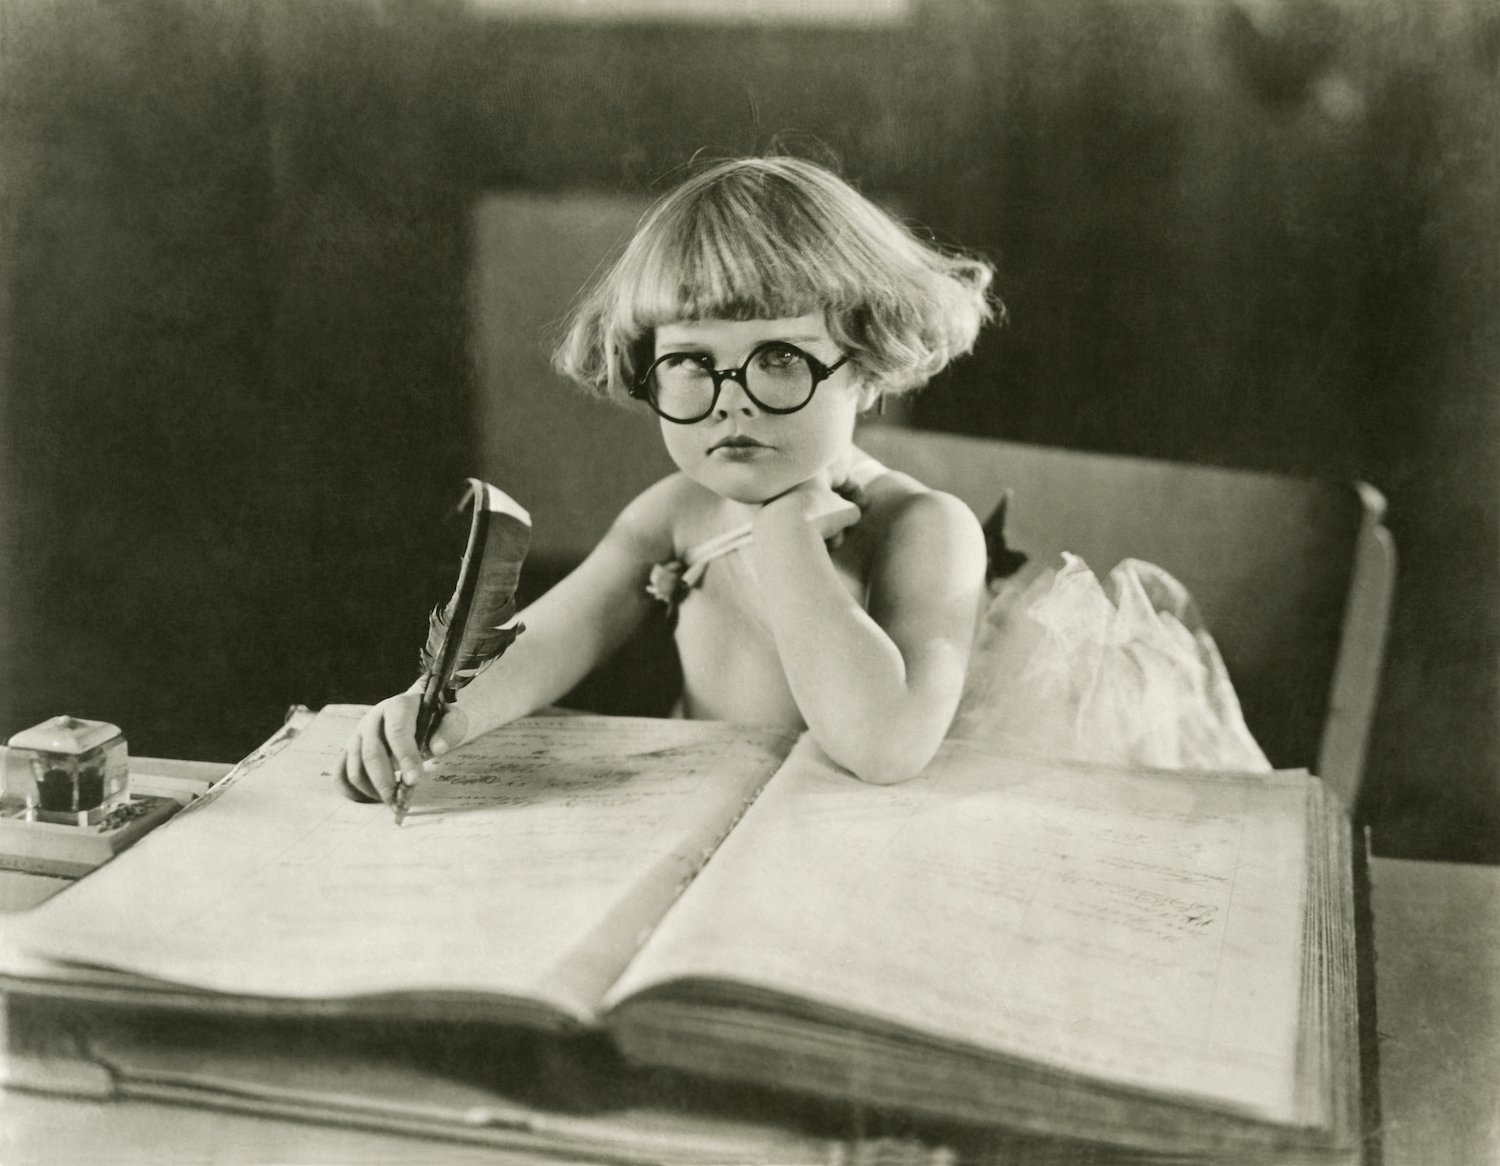 A young child wearing round glasses and writing in a large ledger with a quill pen